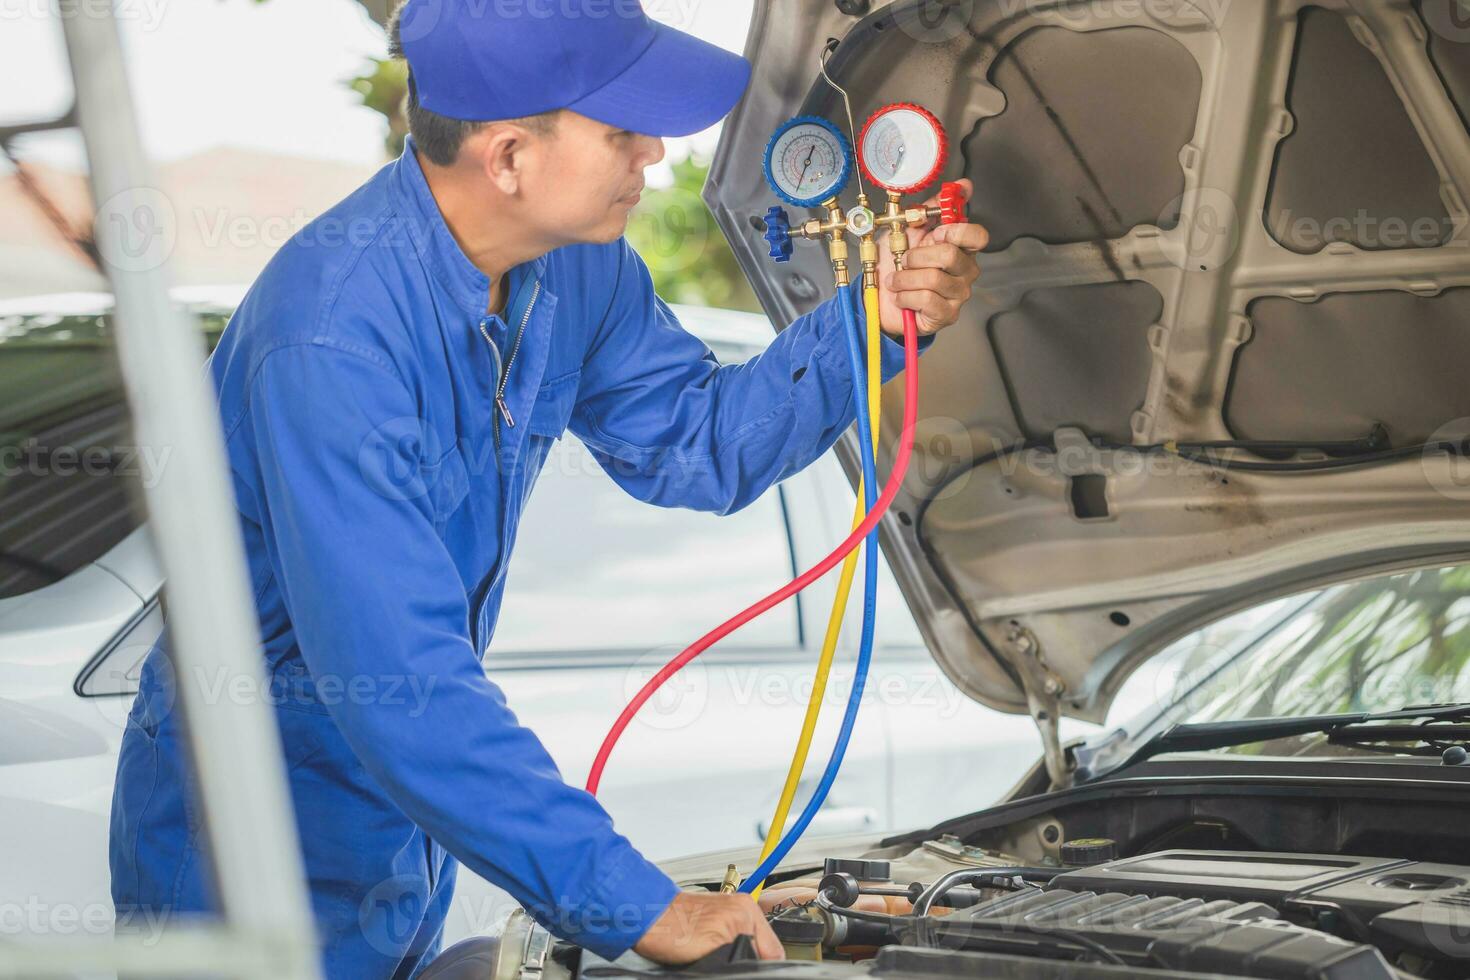 Car Air Conditioning Repair, Technician checked car air conditioning system refrigerant recharge, Repairman check and fixed car air conditioner system photo